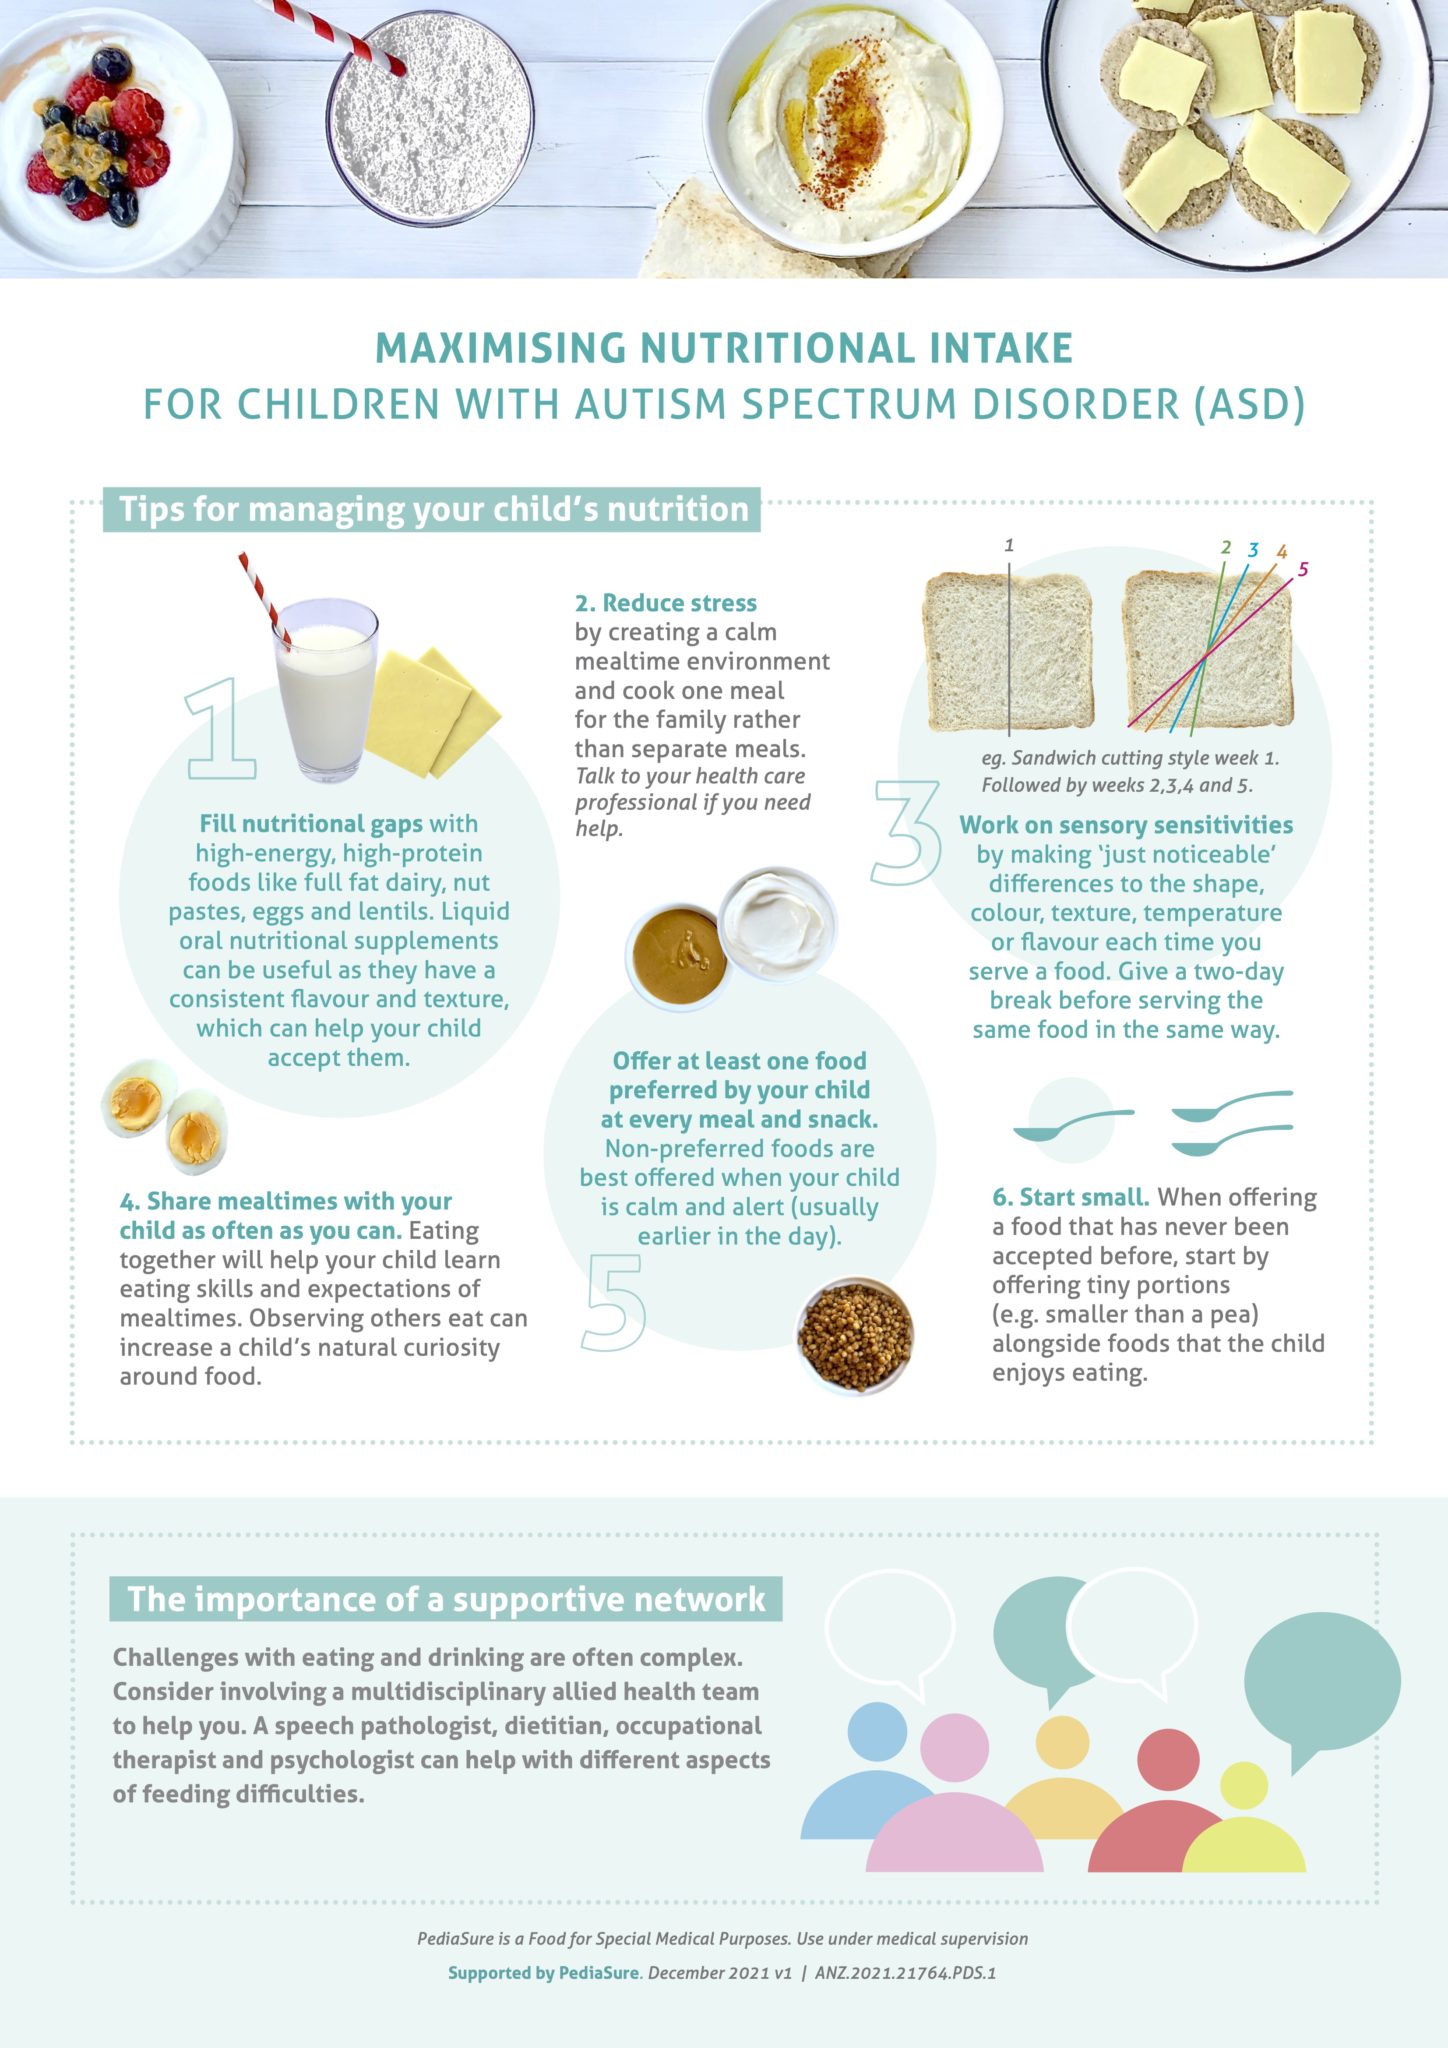 Abbott Patient Resource_Maximising nutritional intake for children with ASD v4